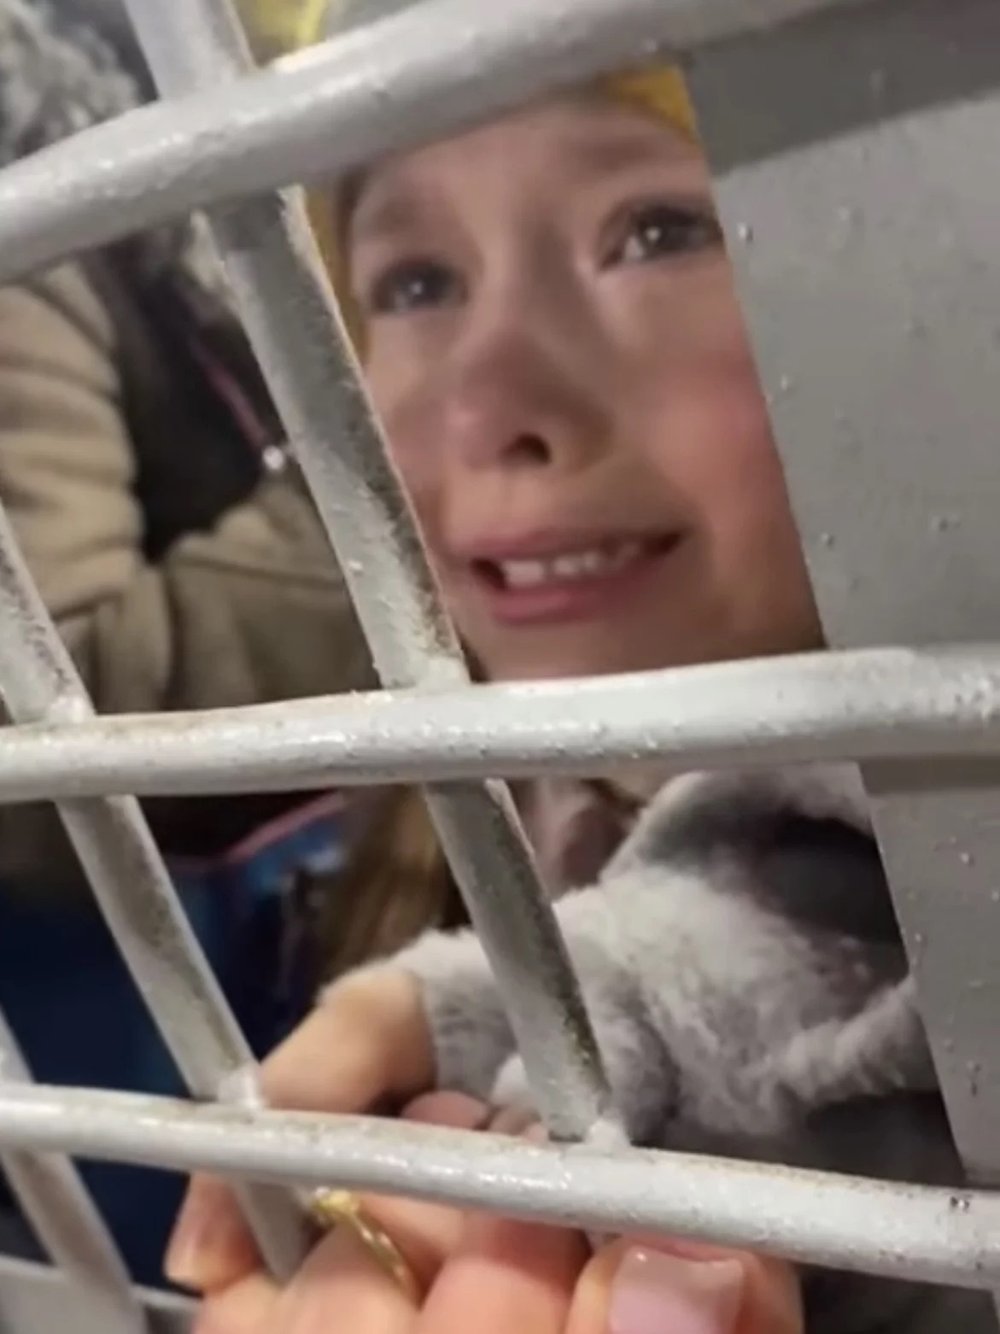  Original caption: A video posted to Facebook and other social media sites by Alexandra Arkhipova shows a young girl weeping as she is held in a cell. The girl, her mother and other children were arrested as they tried to bring flowers to the Ukraini